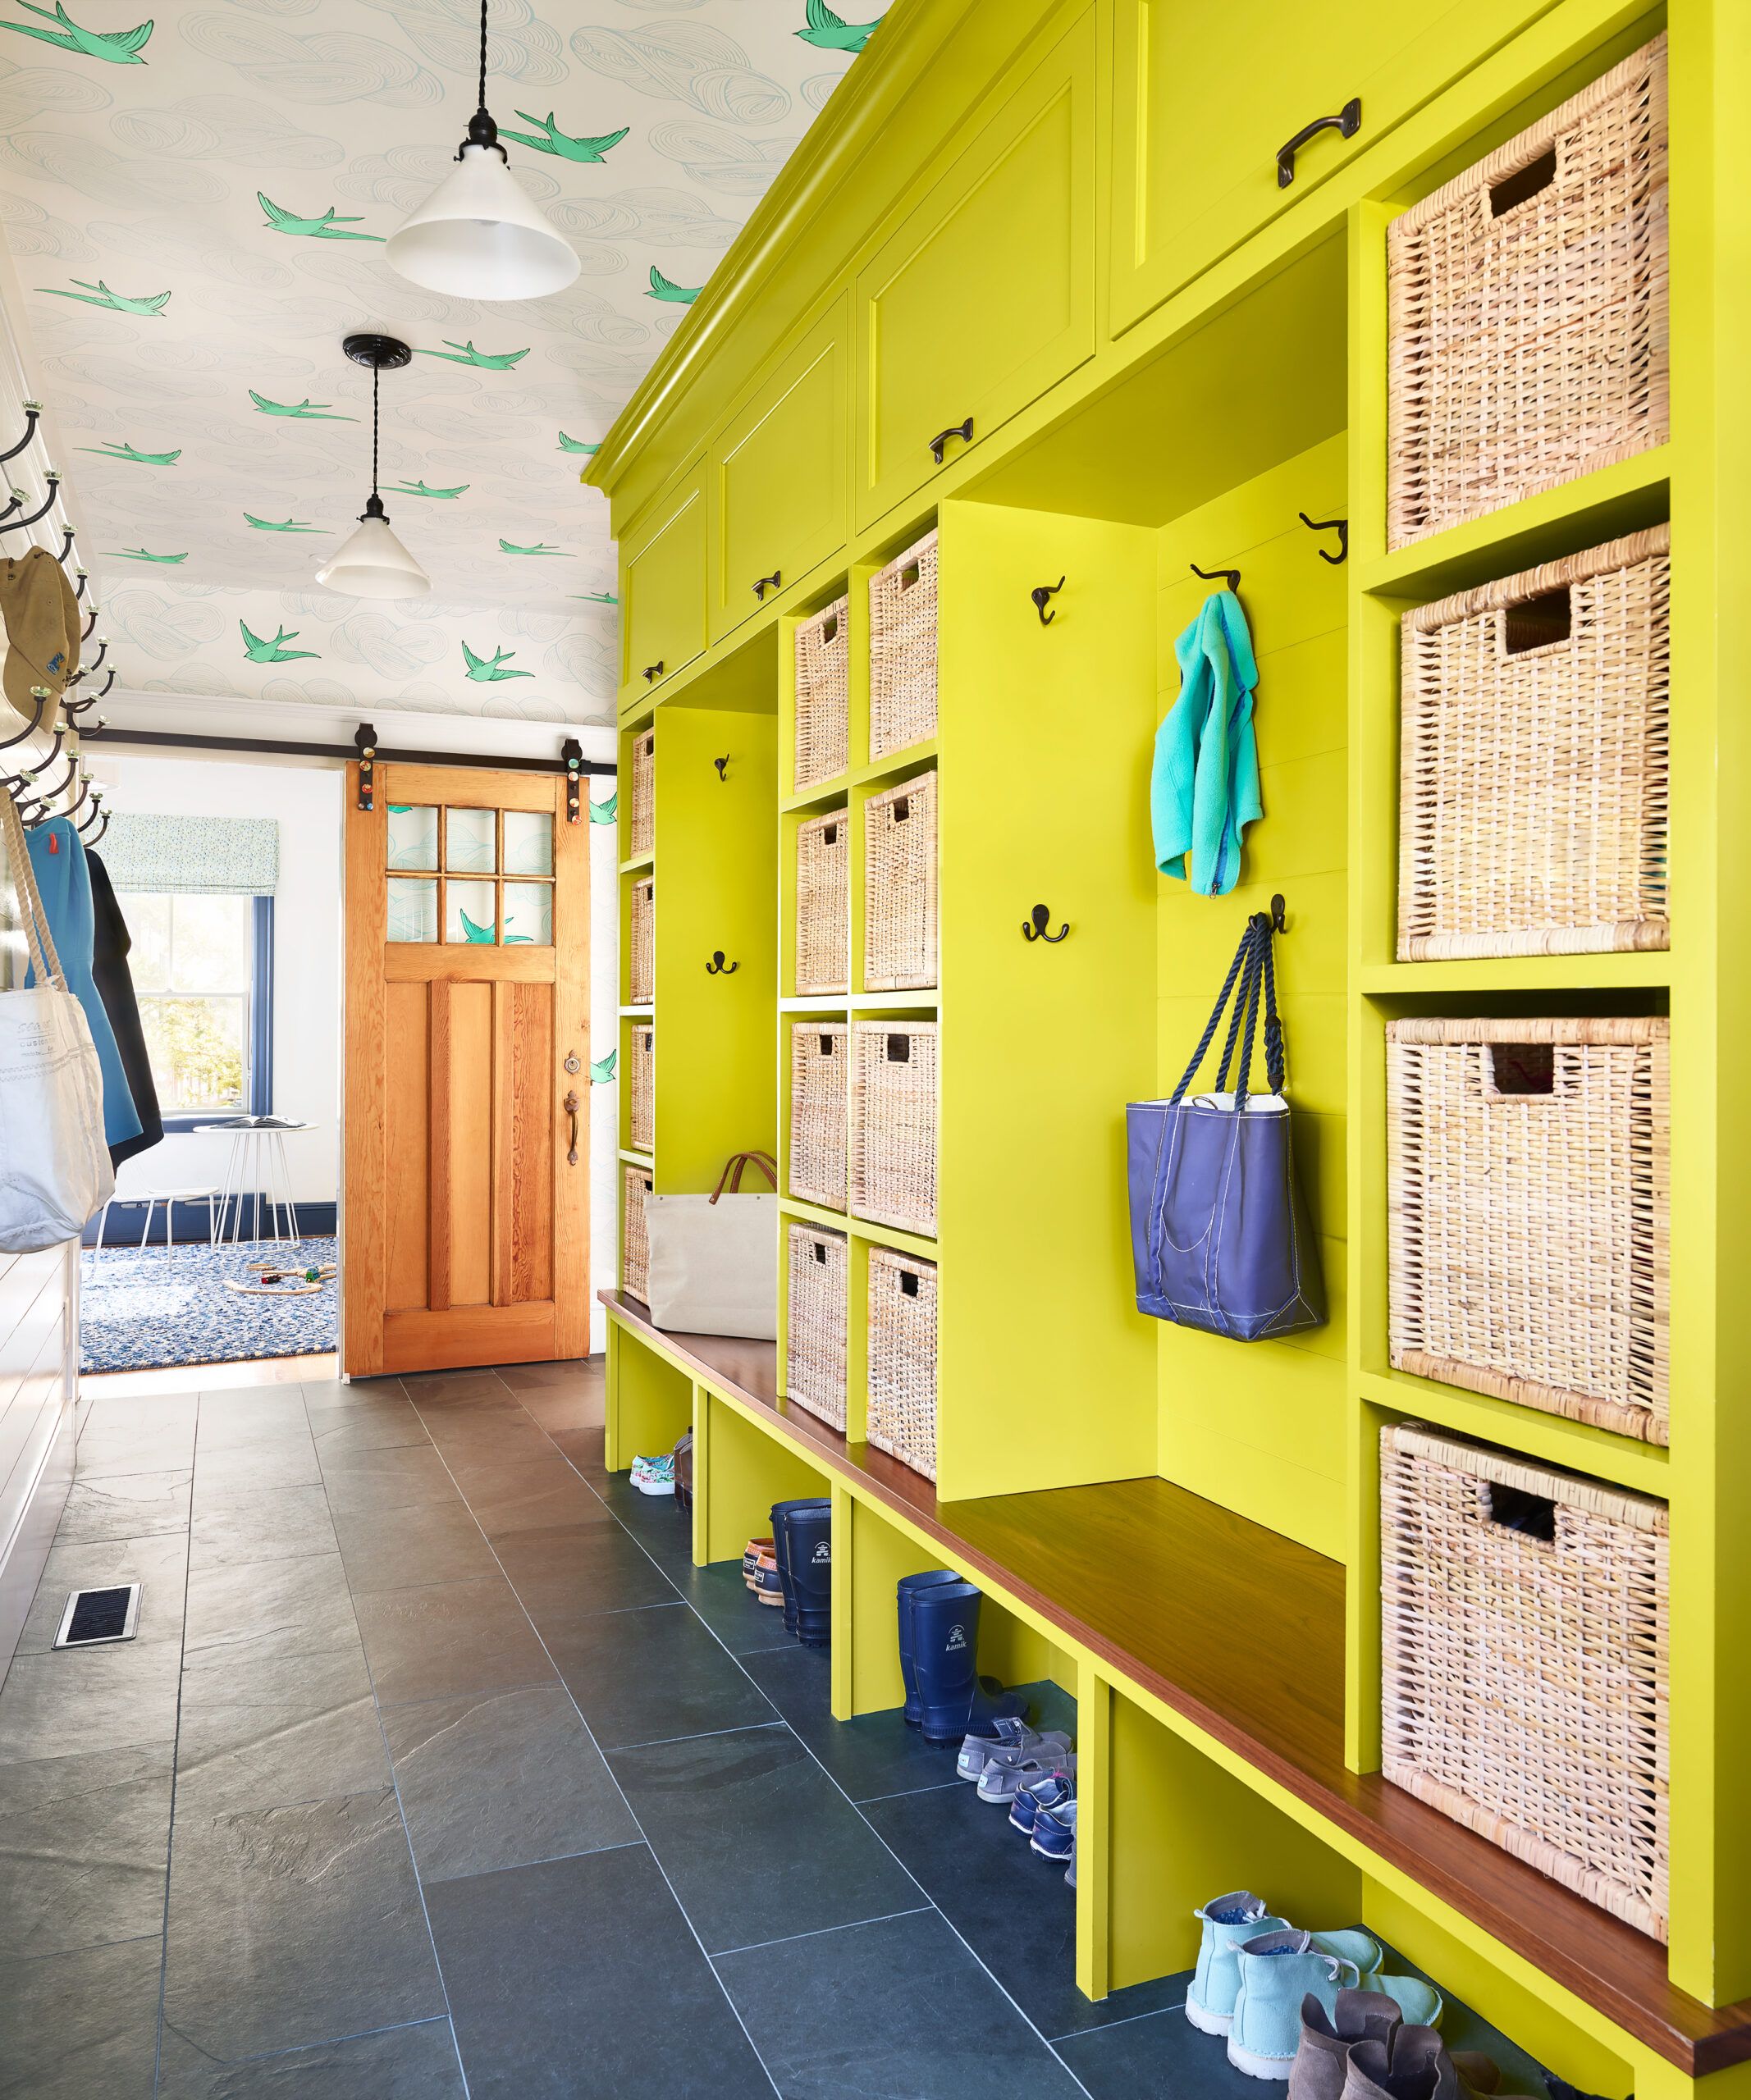 6 Helpful Storage Ideas for Your Mudroom - This Old House